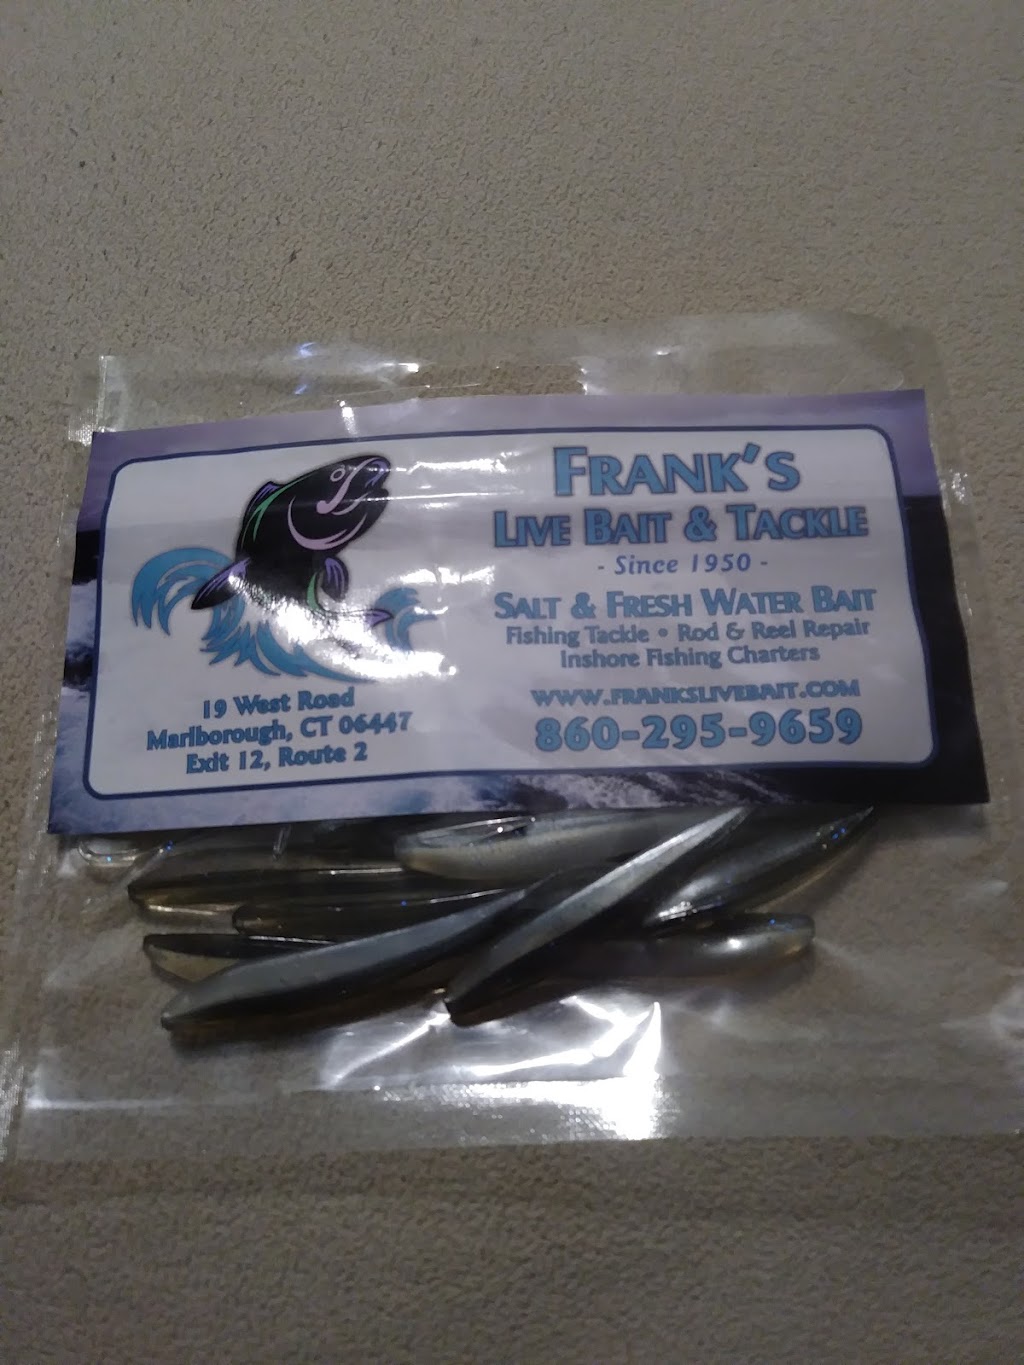 Franks Live Bait and Tackle | 19 W Rd, Marlborough, CT 06447 | Phone: (860) 295-9659